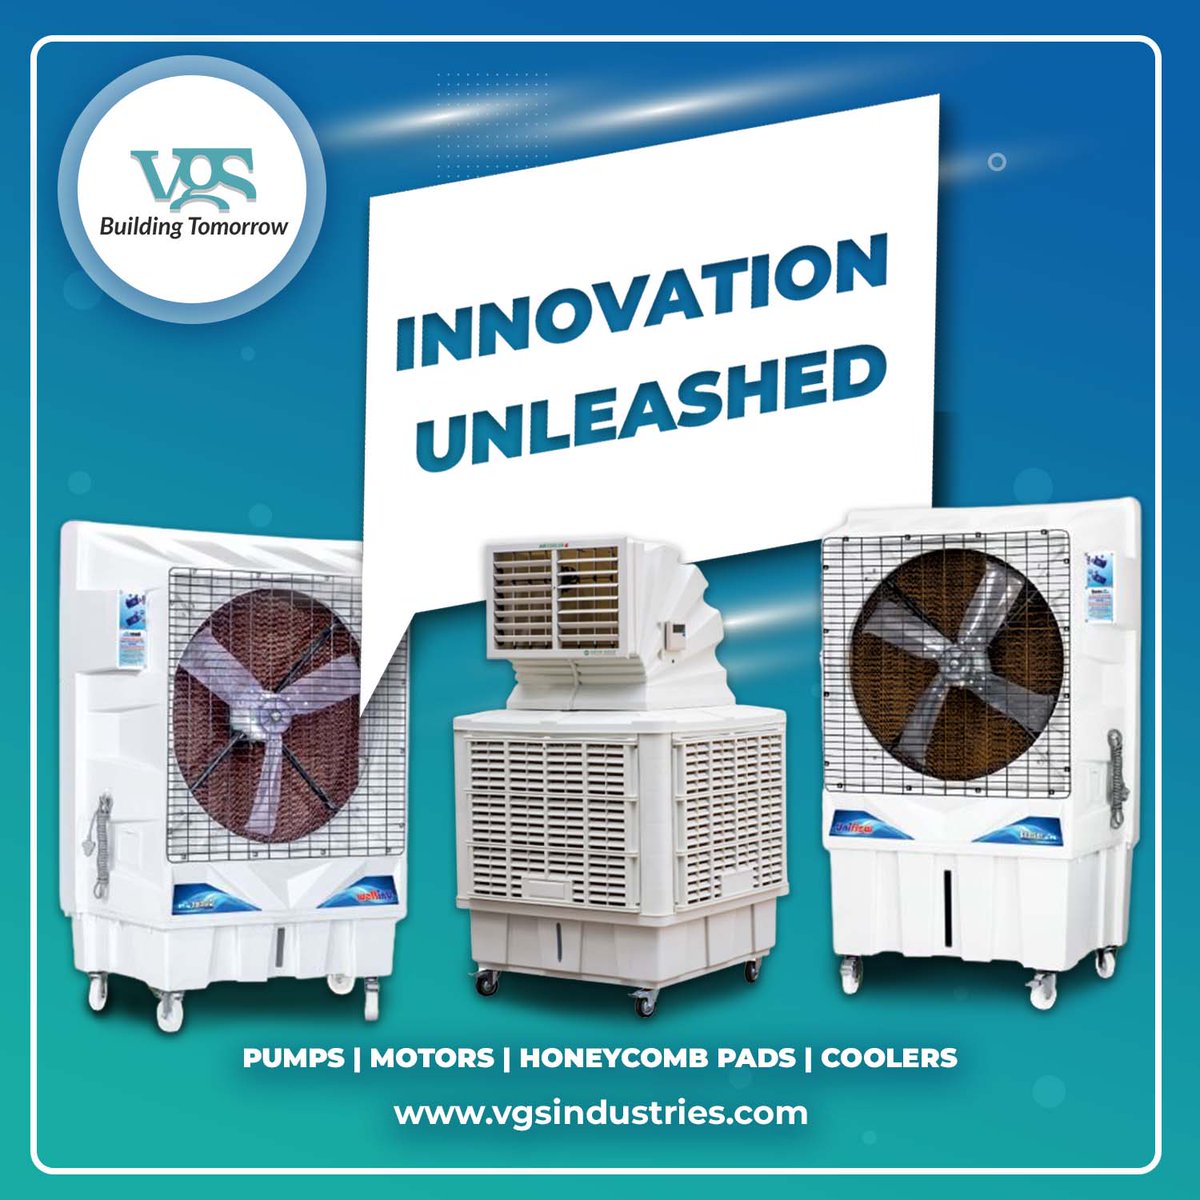 Discover the future of cooling with VGS Industries' cutting-edge products. 

vgsindustries.com

#aircooler #cooler #coolerprice #coolers #coolingpad #ductaircooler #ductcooler #ductingcooler #honeycomb #honeycombpad  #minimotorpump #motorpump #pump #pumps #vgsindustries